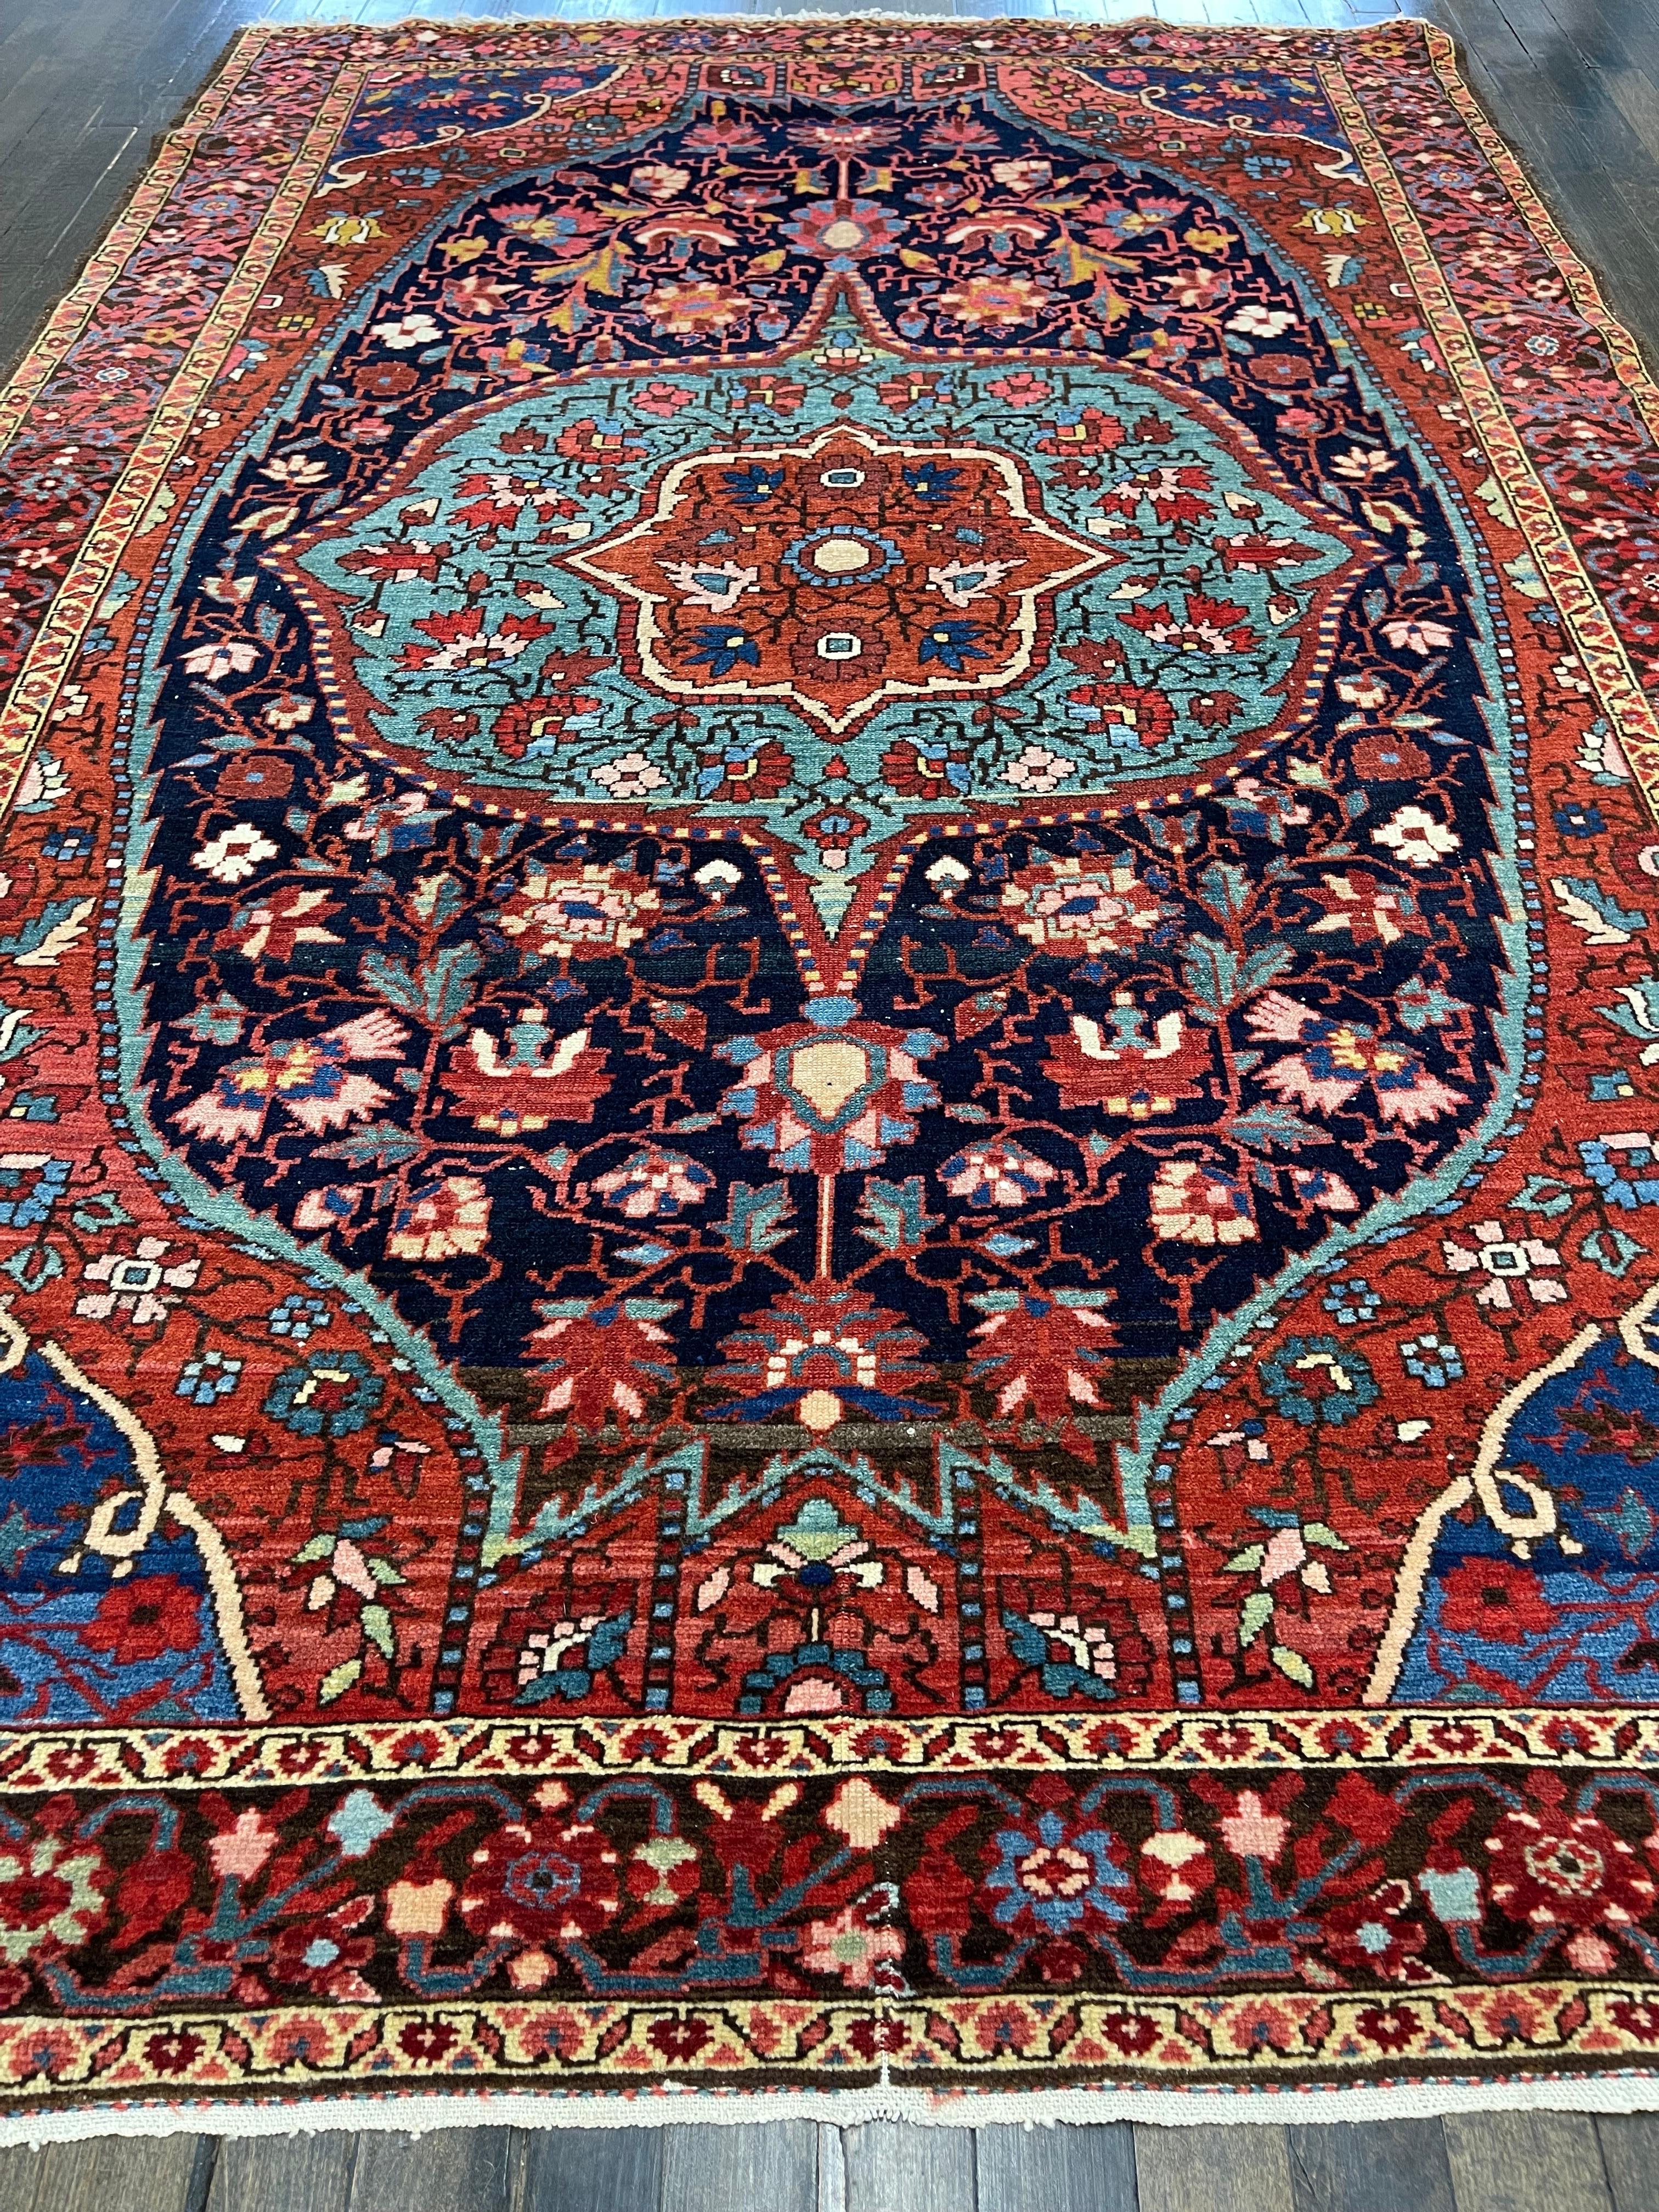 Handwoven in one of the major rug making centers in Iran, Malayer. This carpet is an exceptional example of fine Persian rugs. Malayer is well known to have produced high quality carpets with close clipped high knot counts using Turkish knot.

The